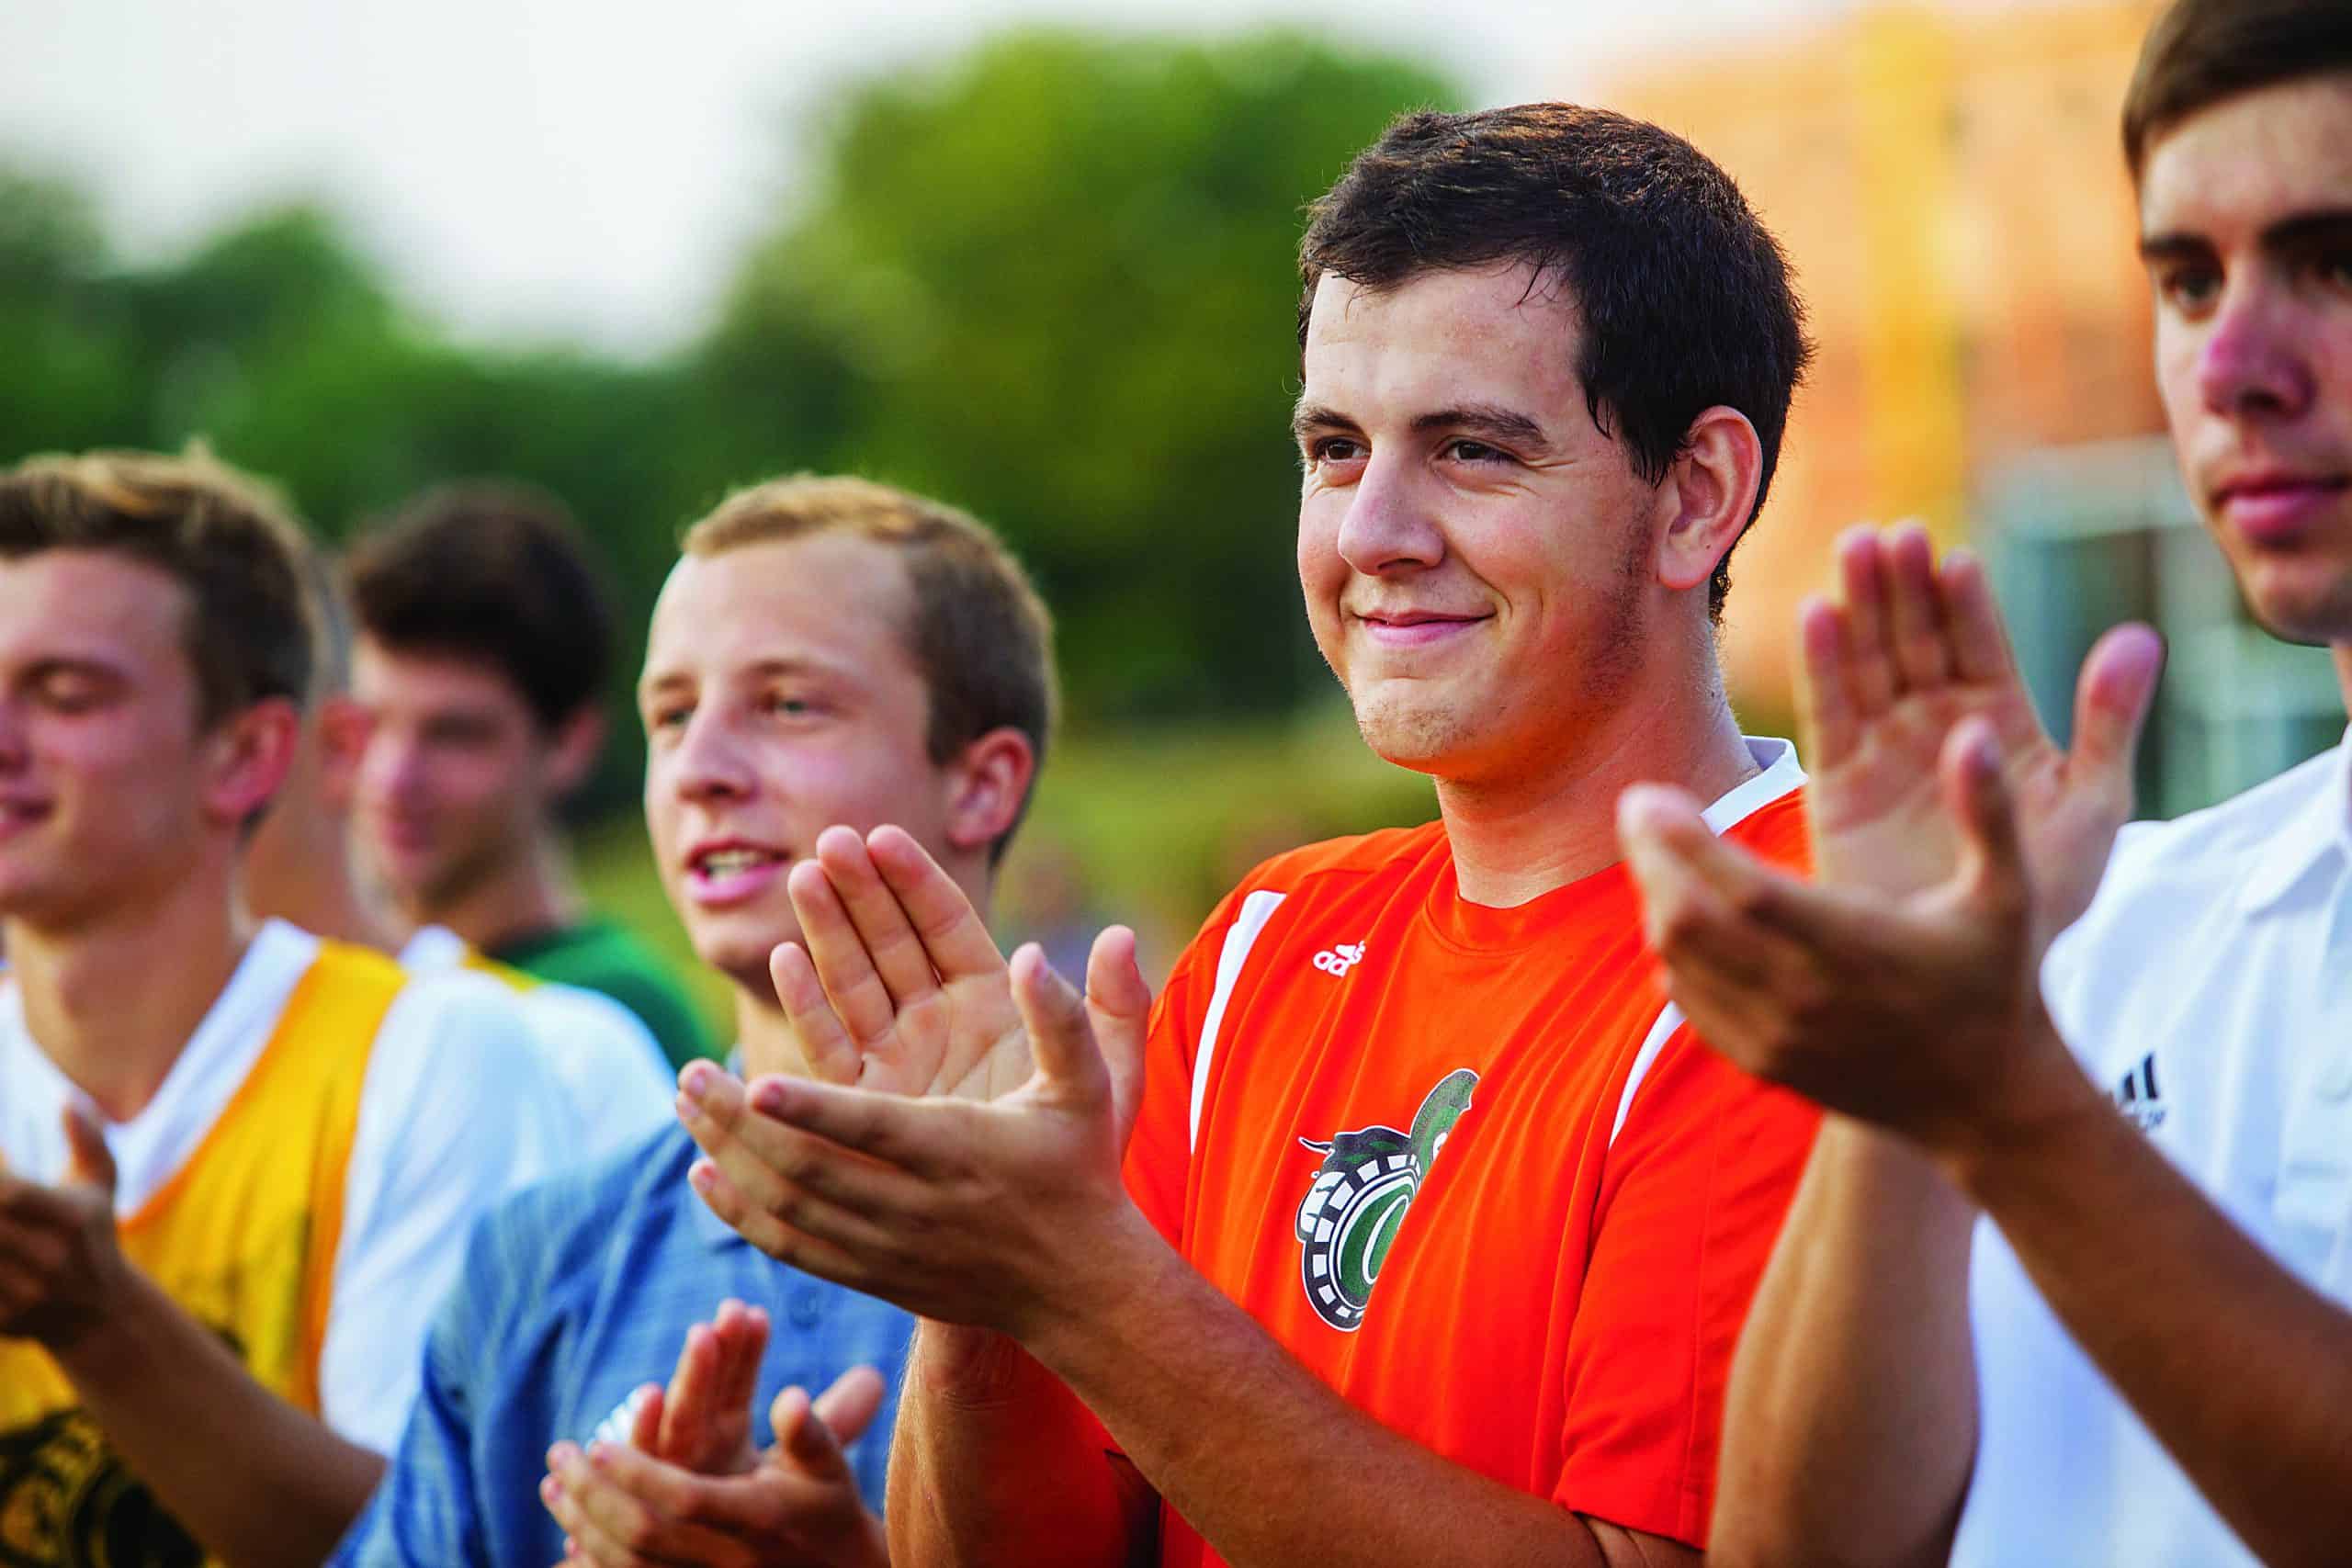 A brown haired young man in an orange shirt claps his hands in a crowd of other young men.